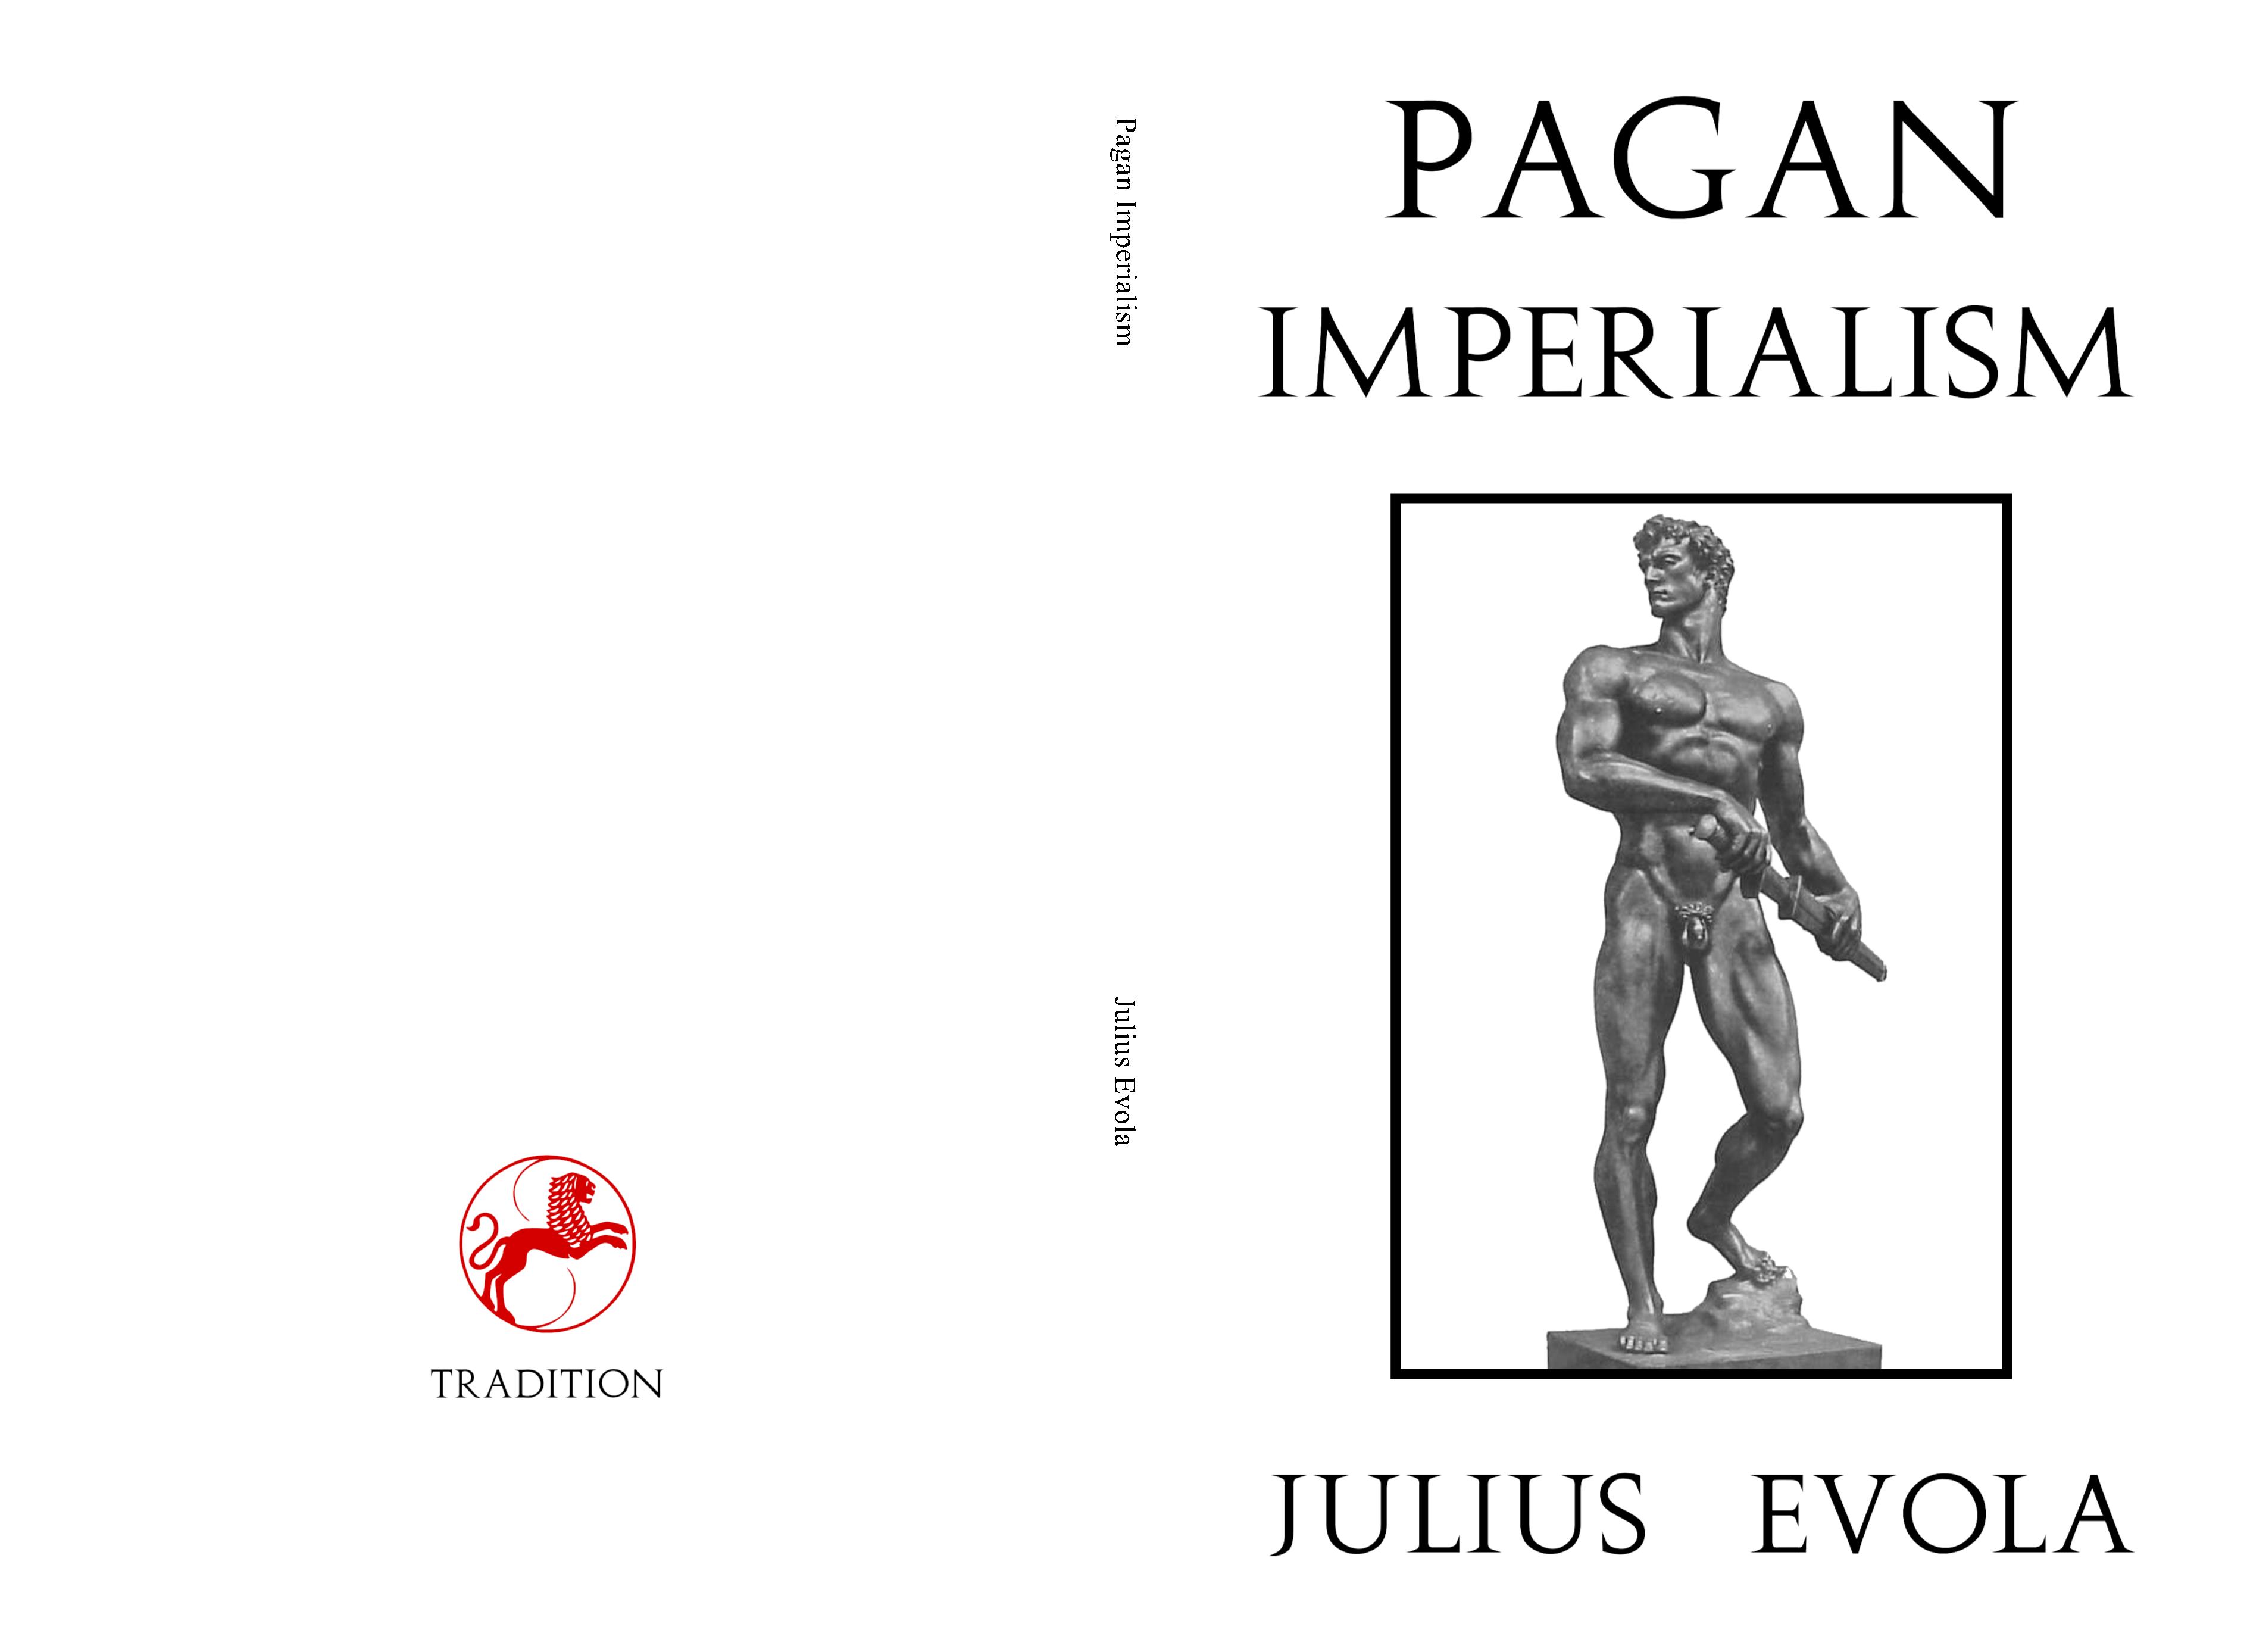 Pagan Imperialism cover image